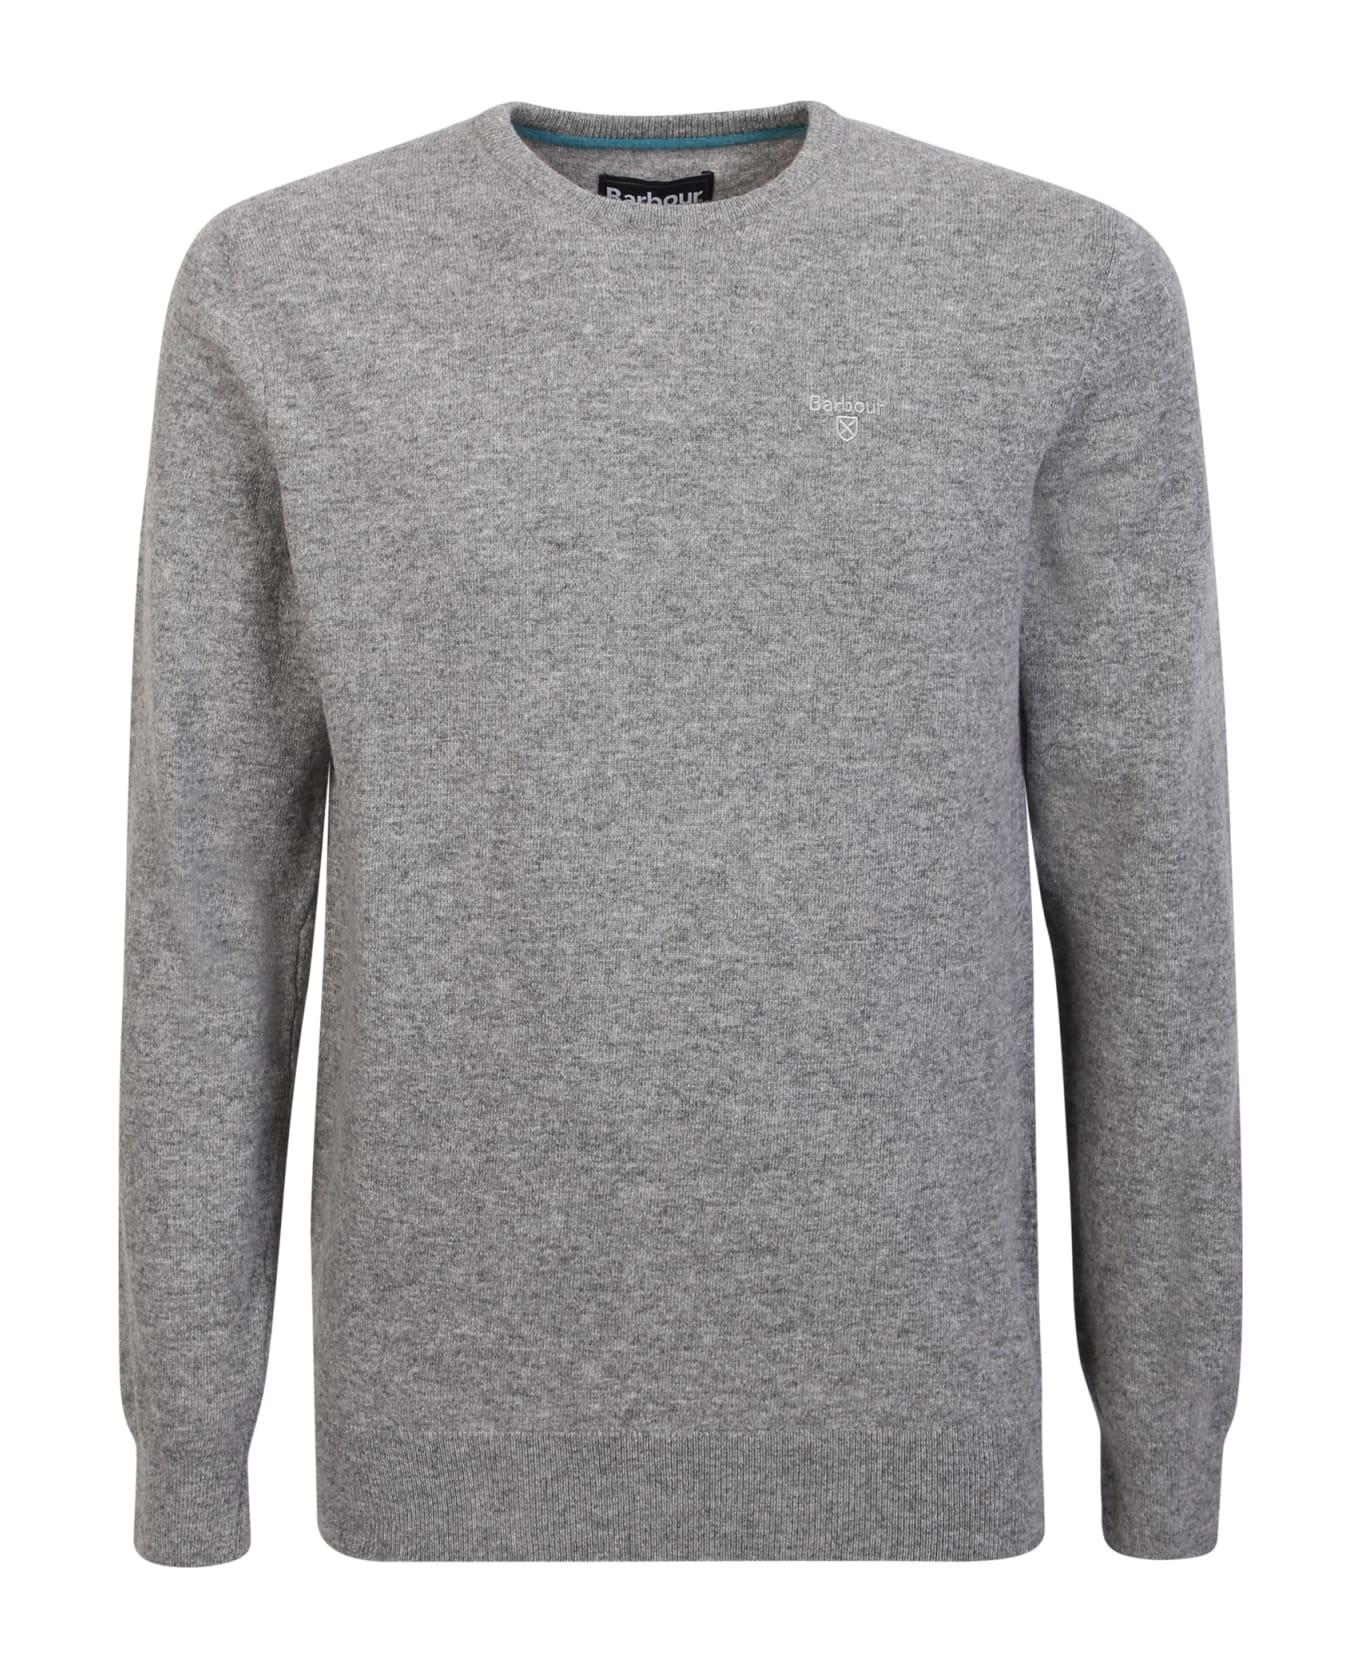 Barbour Basic Knit Pullover - Grey